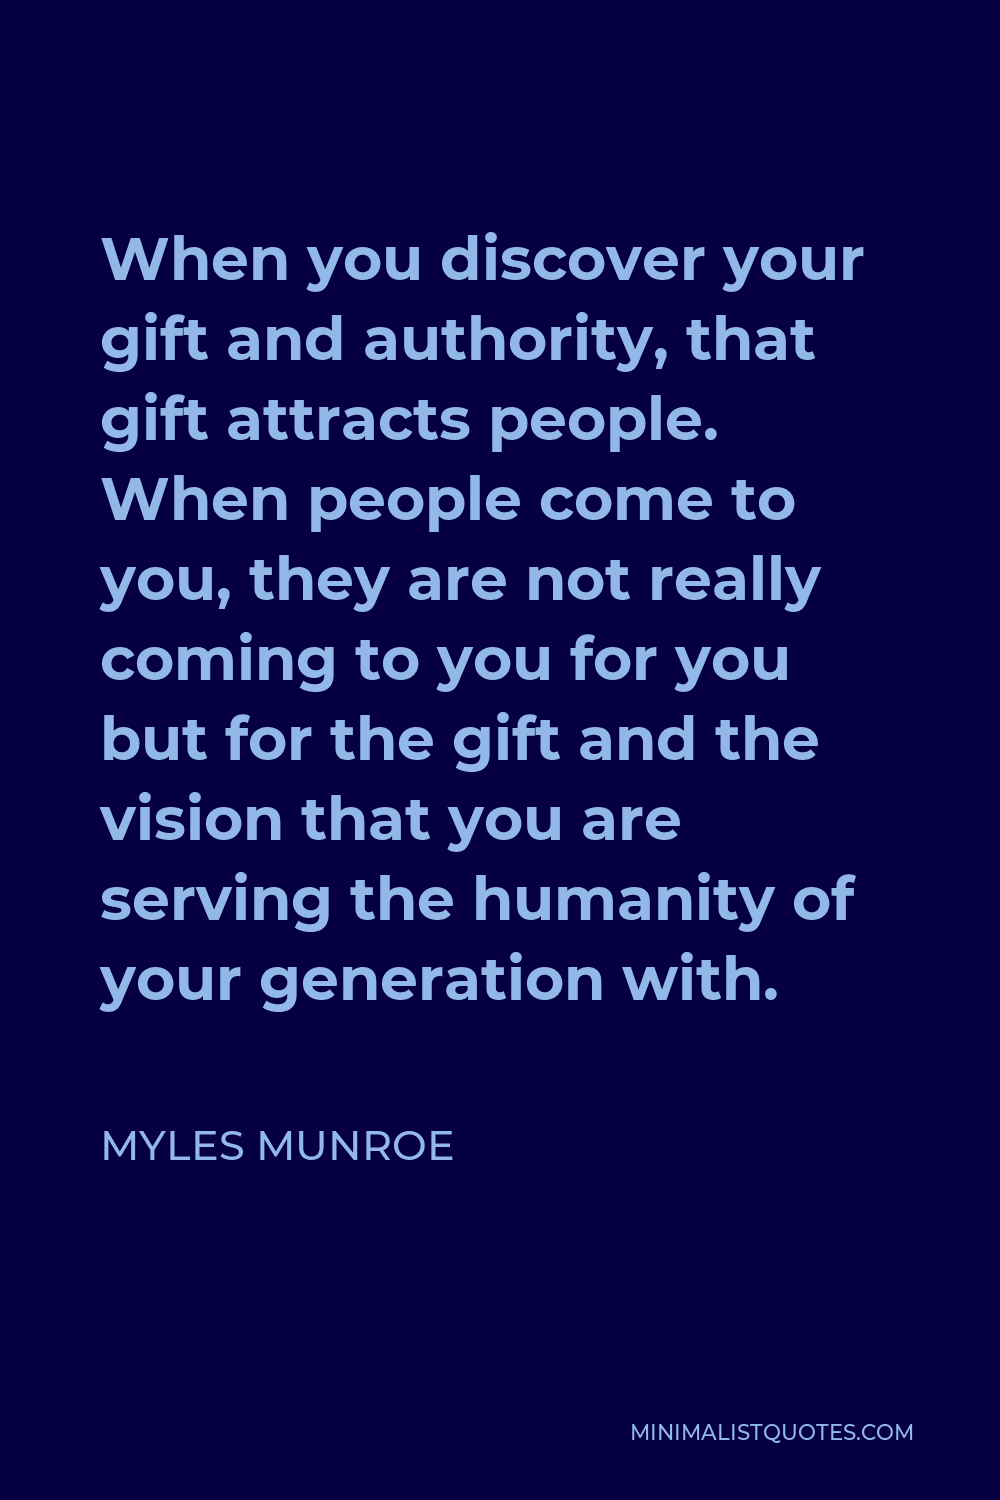 Myles Munroe Quote - When you discover your gift and authority, that gift attracts people. When people come to you, they are not really coming to you for you but for the gift and the vision that you are serving the humanity of your generation with.